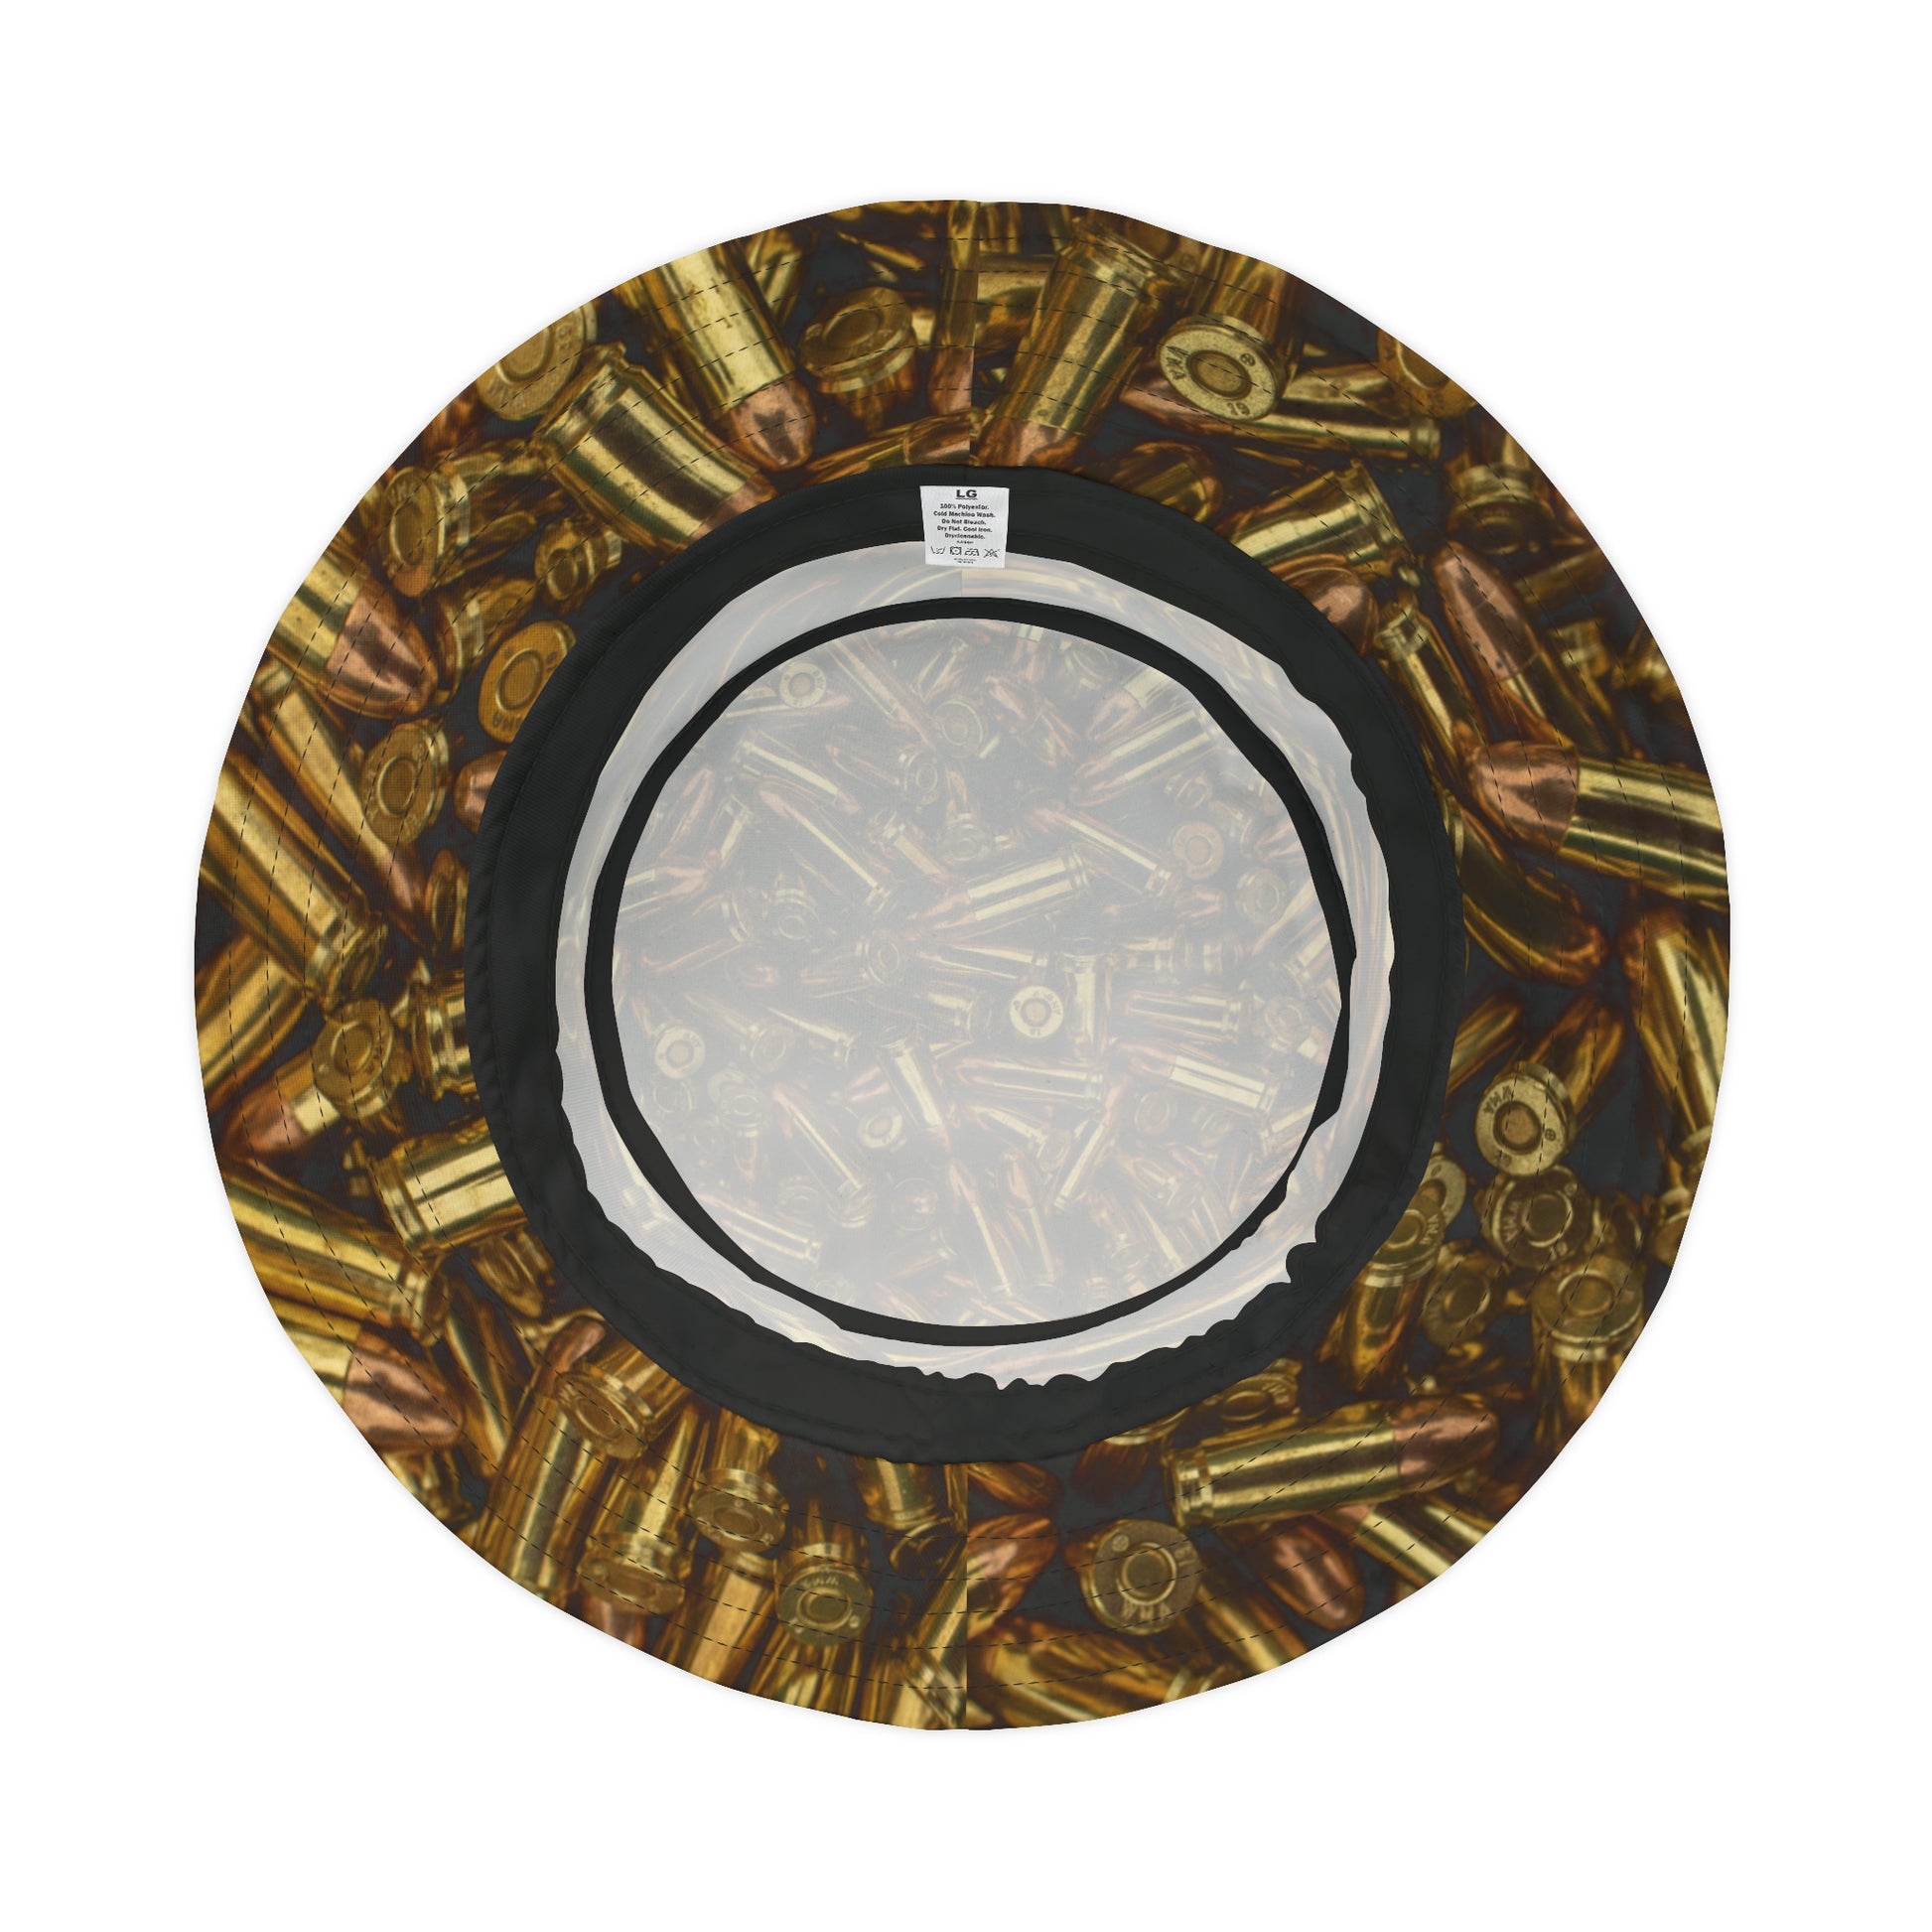 A Bullet in Your Hat (Gold) - Ribooa